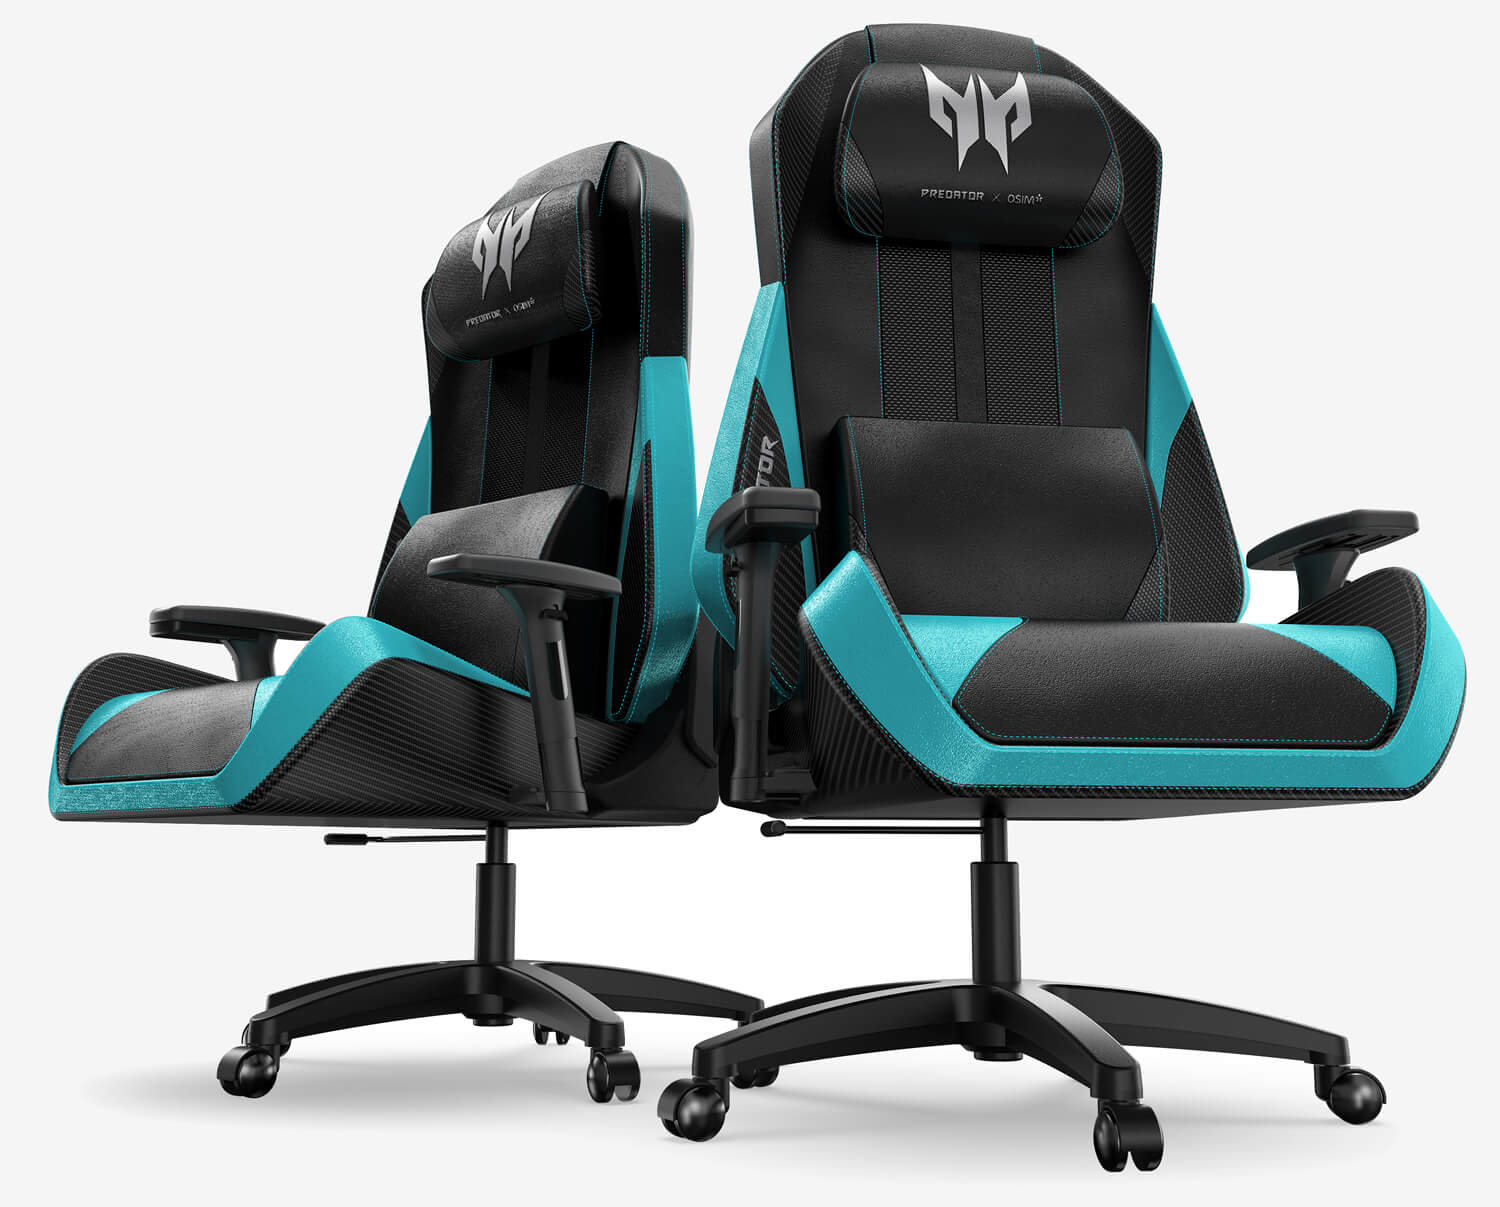 Acer goes all-in on gaming culture with massage chair and energy drink